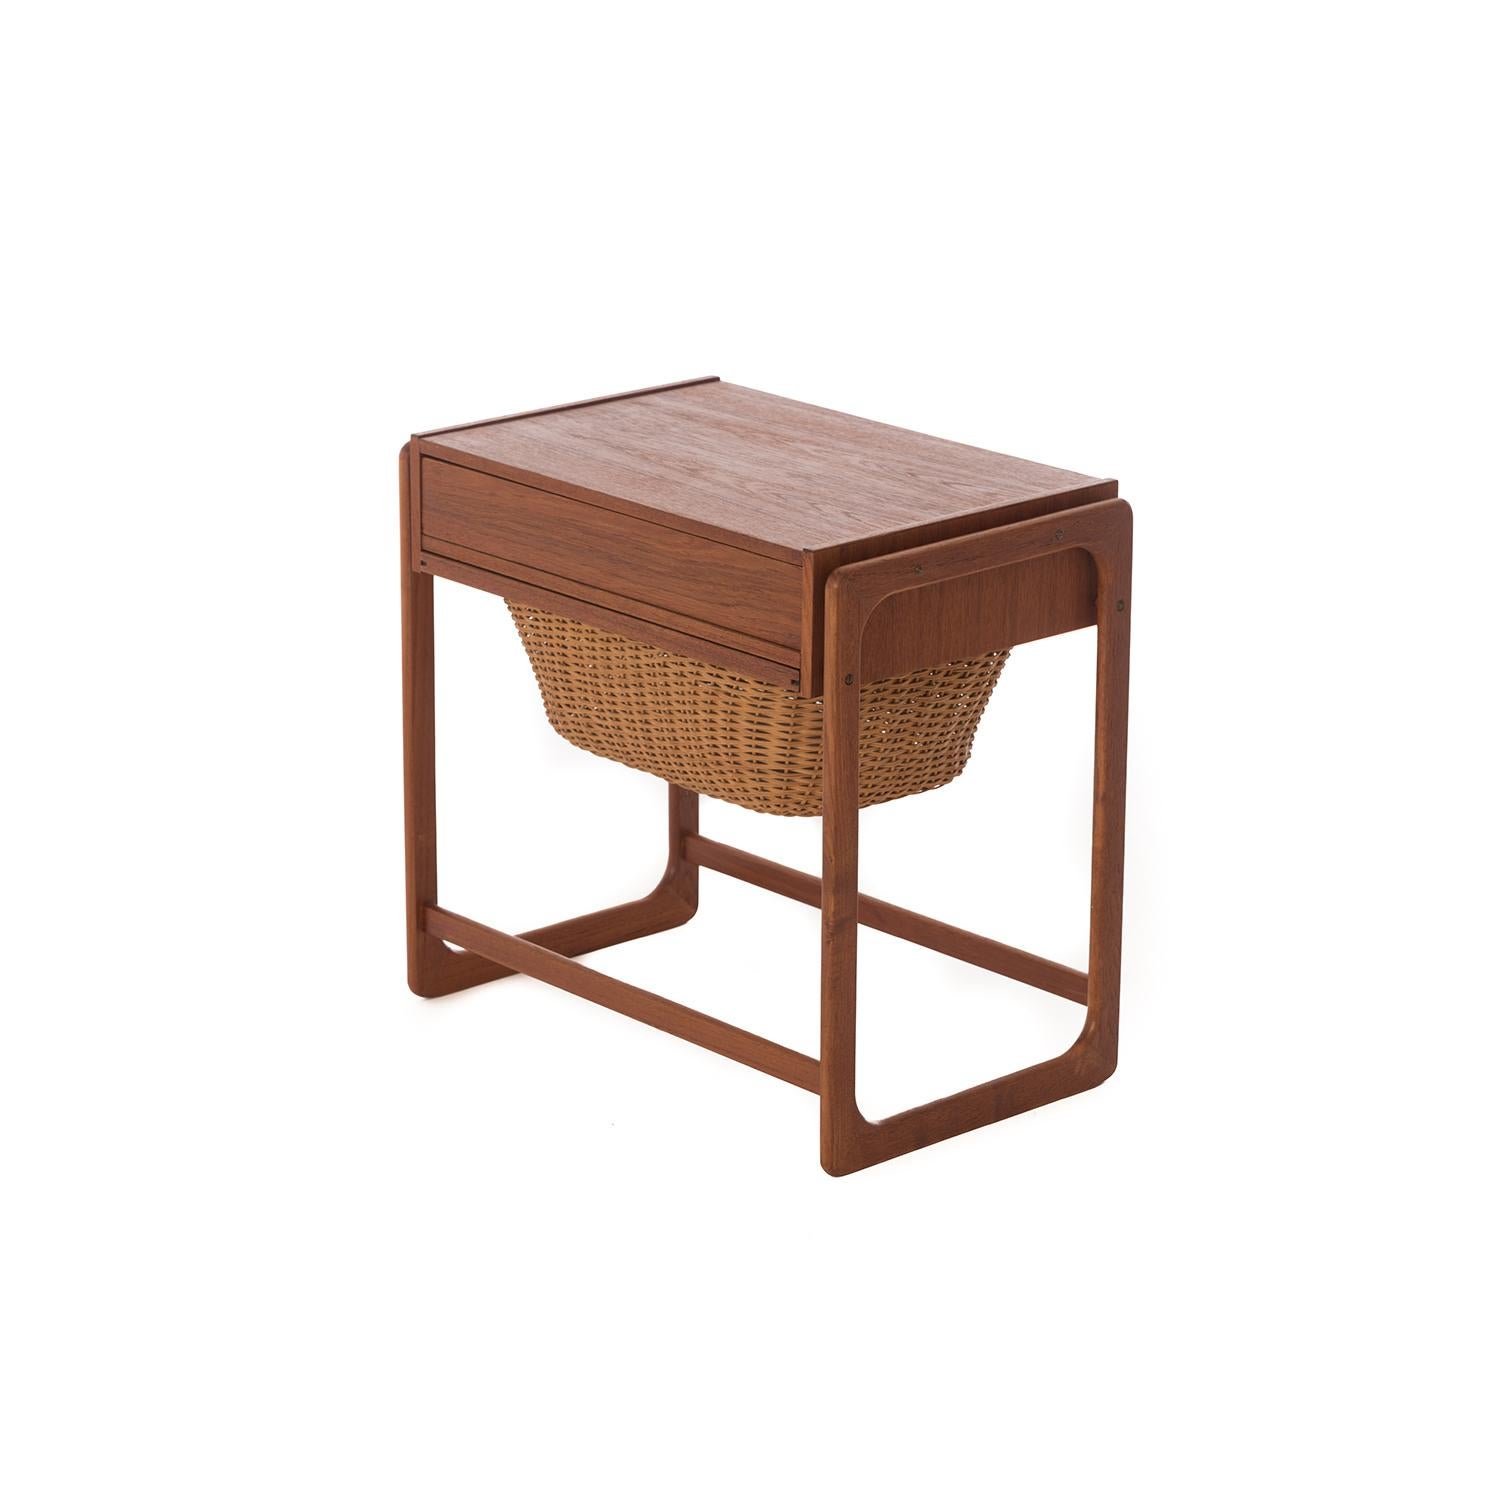 This lovely vintage teak sewing table features a pull out basket (for piece-work) and a compartmentalized drawer to store the implements.  If you aren't a sewer don't despair, the re-purposing opportunities are endless.  Old growth teak with a